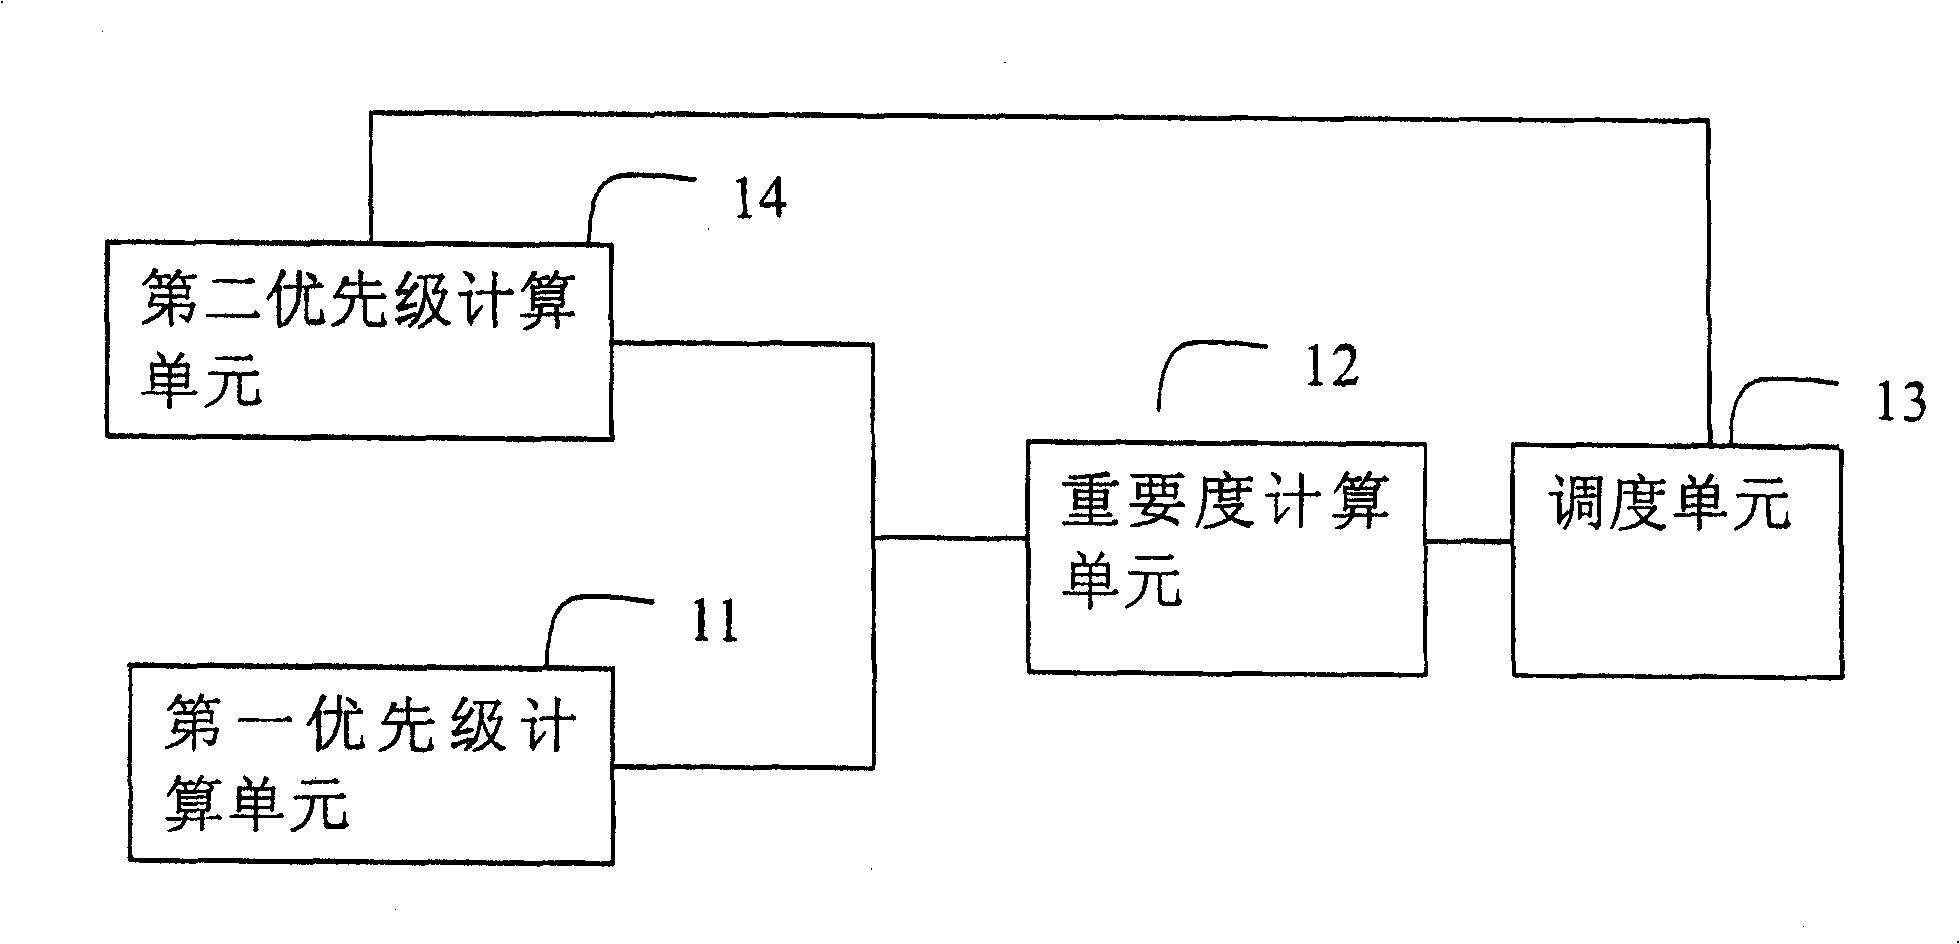 Scheduling apparatus and method